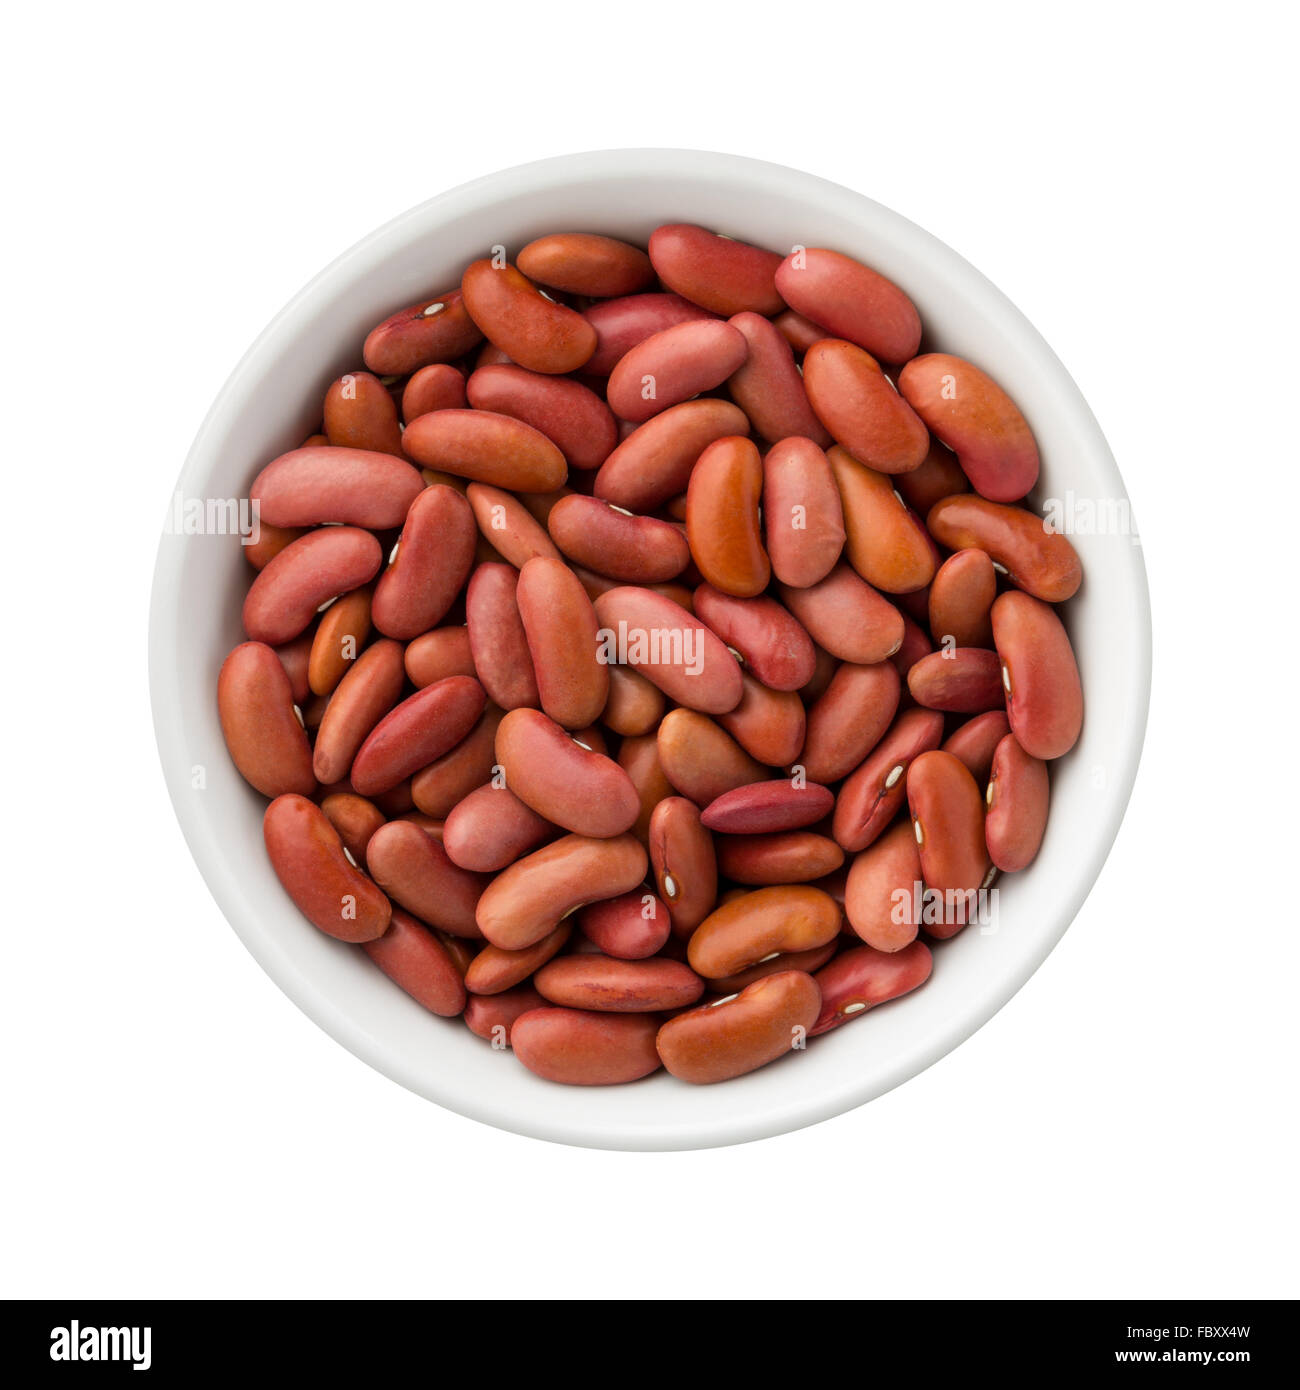 Red Kidney Beans in a Ceramic Bowl Stock Photo